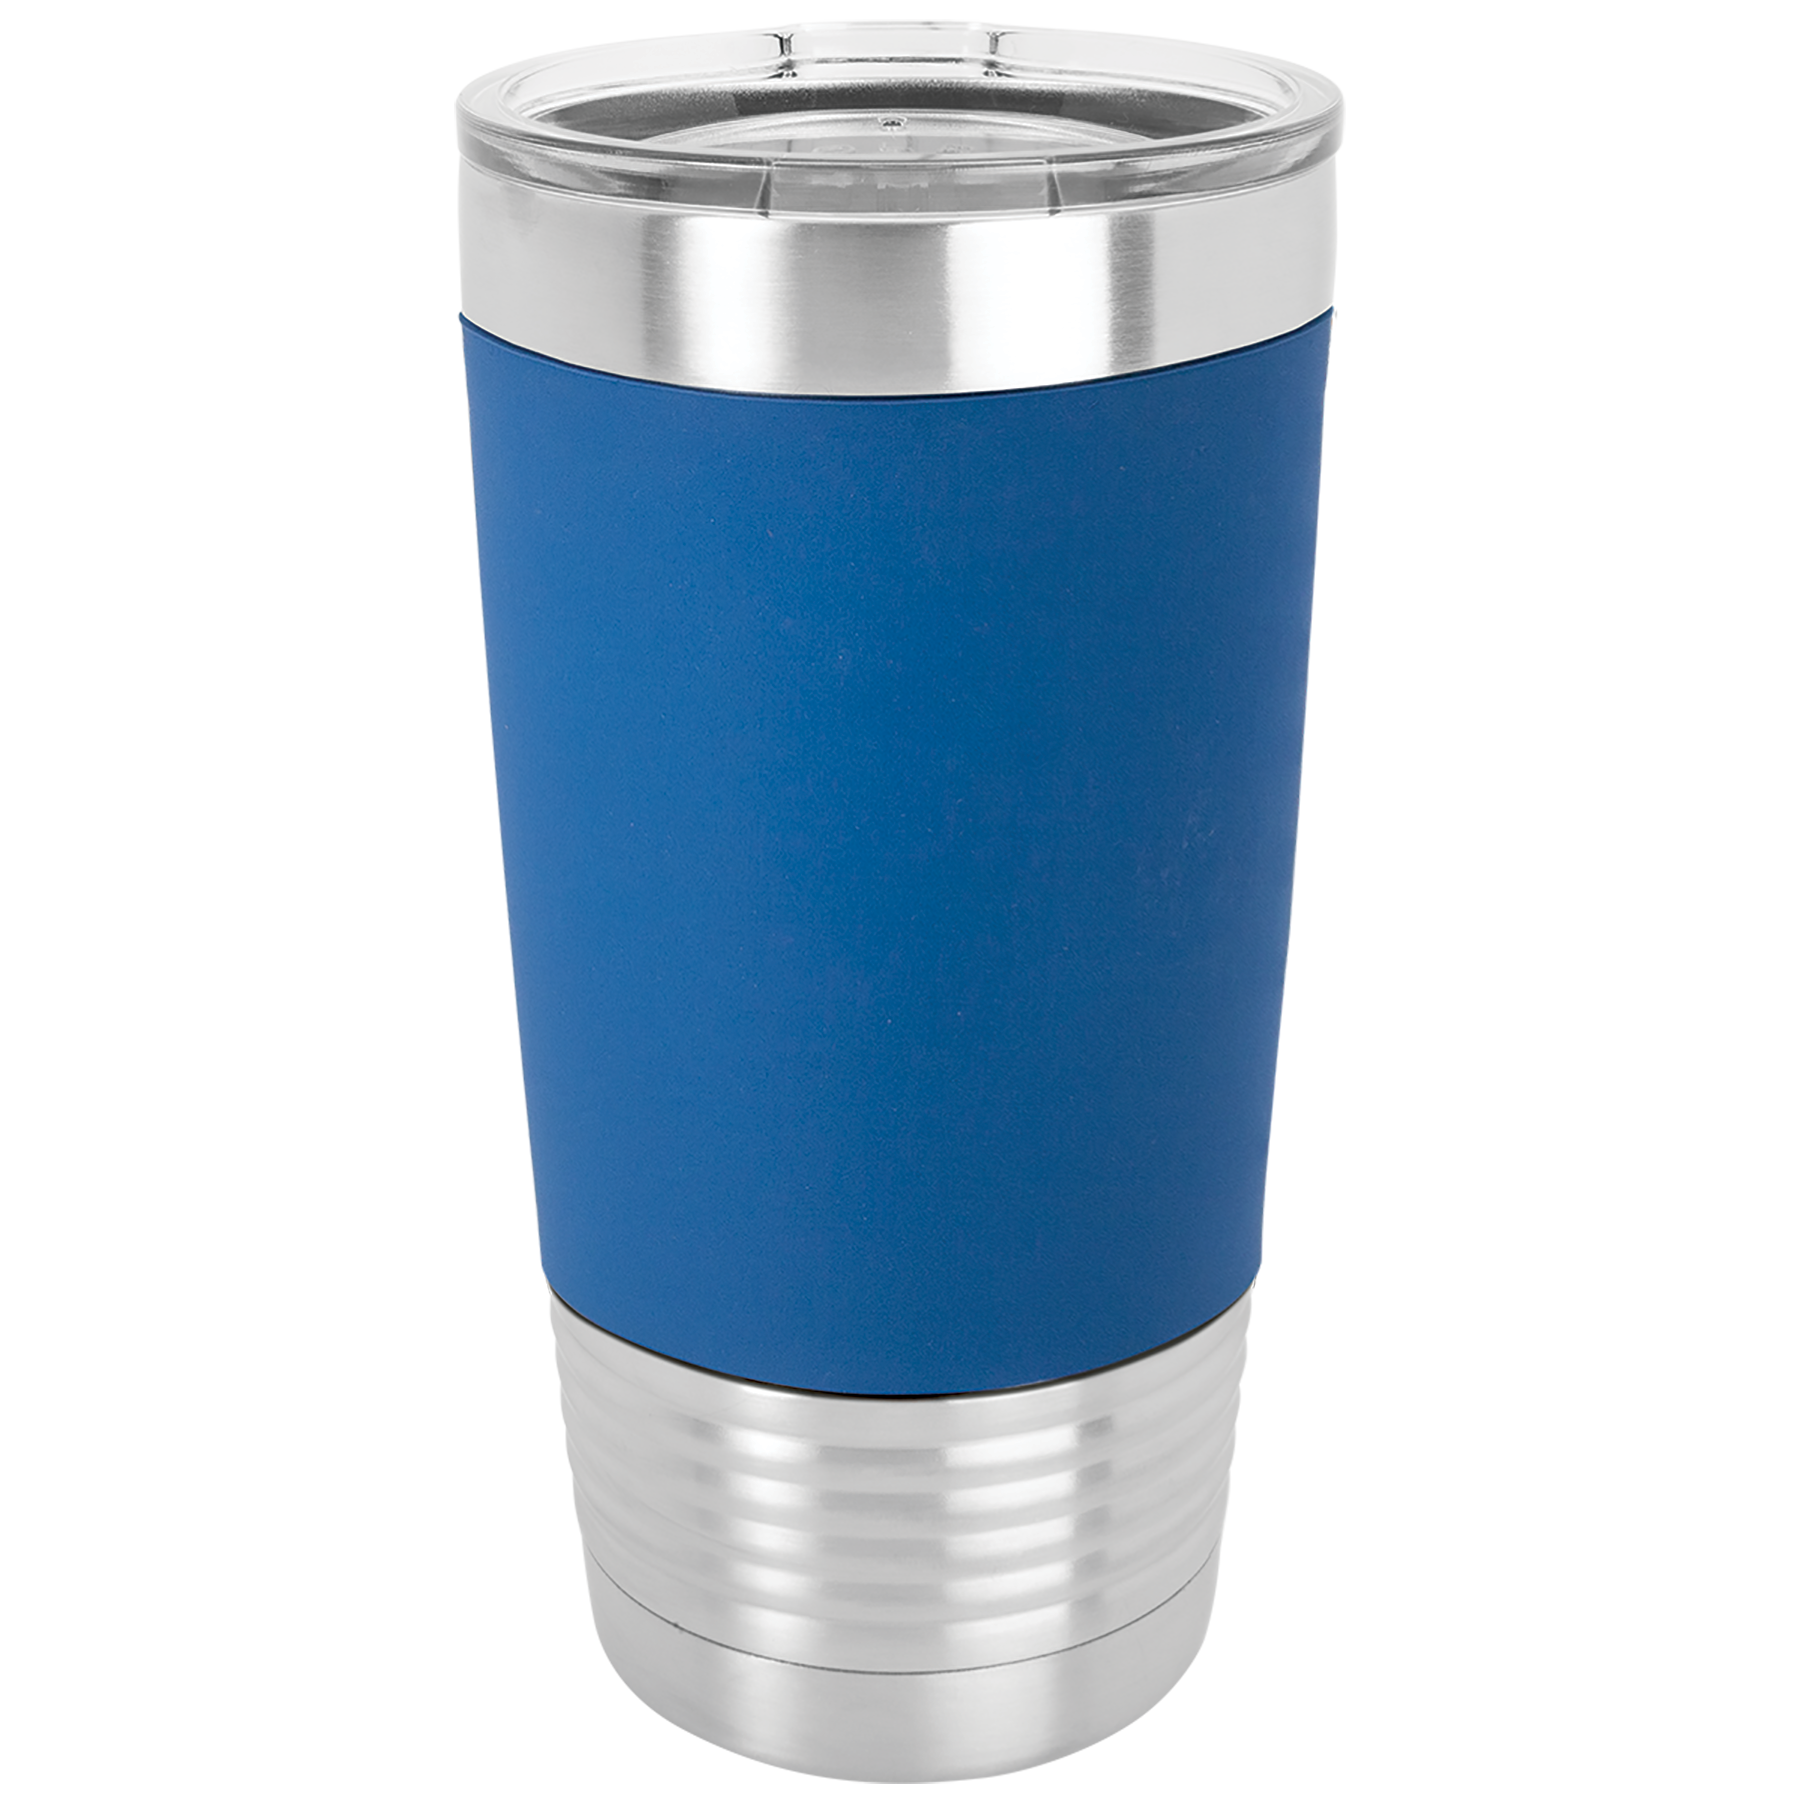 Royal Blue Engraves to White 20oz Silicone Grip Tumbler -One Free Engraving -Double-wall Vacuum Insulated -Made from 18/8 Gauge Stainless Steel (Type 304 Food Grade) -Lid is BPA Free (Hand Wash Only) -Not recommended for Dishwasher -Silicone Sleeve is Removable -Works with Cold and Hot Drinks -7 Color Options -Perfect for Personalized Gifts, Awards, Incentives, Swag & Fundraisers